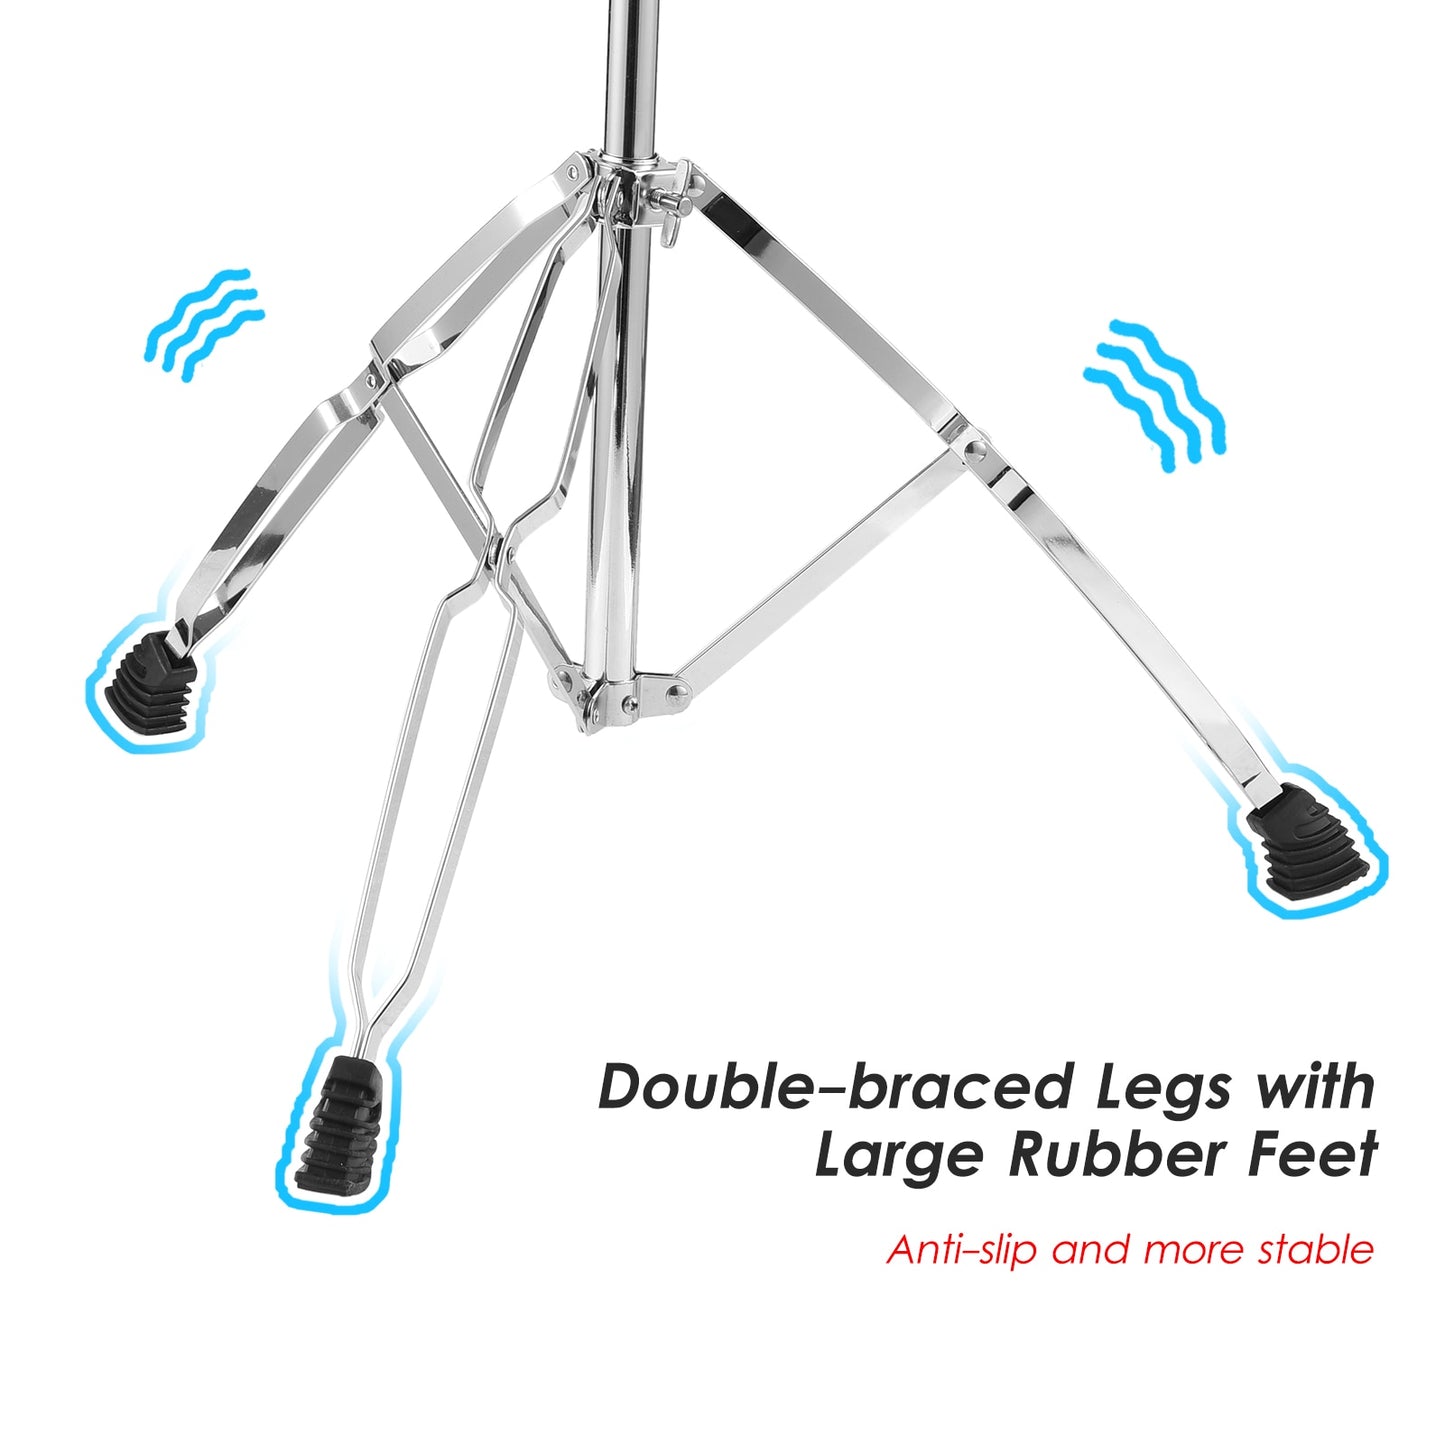 Elevate Your Drumming Experience - Cymbal Stand